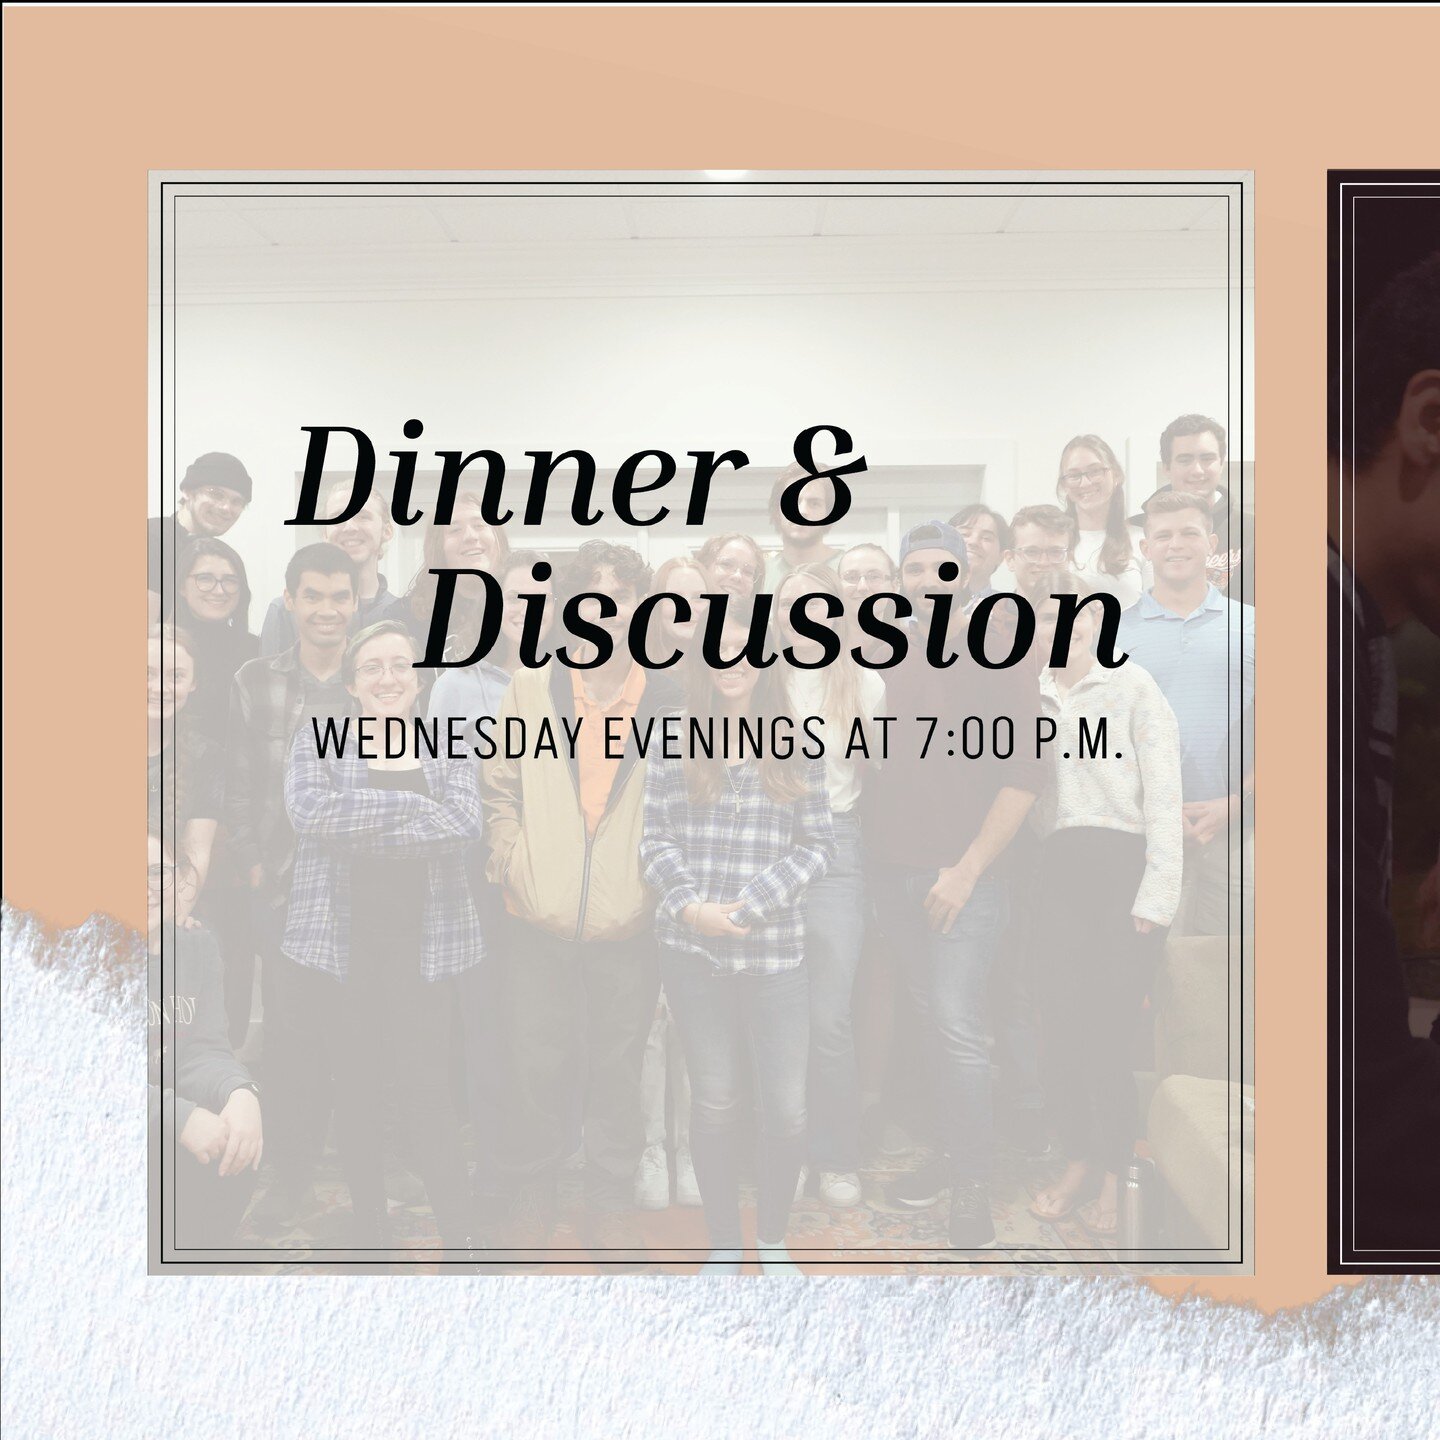 A few things for your calendar:

- Dinner and Discussion - Every Wednesday at 7:00 p.m. in the Episcopal Student Center.
- Breakfast at Midnight - 11:00 p.m. on January 12 in the Episcopal Student Center
- Coffee Groups - Various options, fill out th